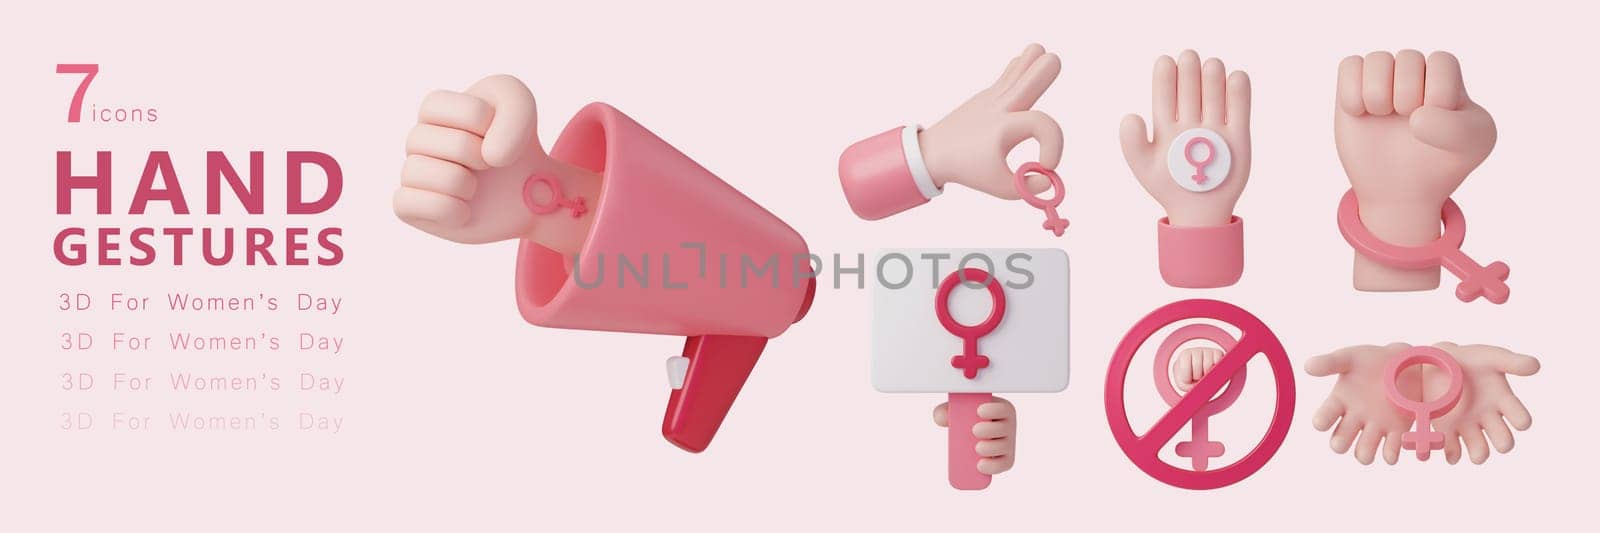 3d Hand gestures icon set , For equality woman's day ,march 8. Raise awareness, prevention, detection, treatment. Icon design 3d illustration by meepiangraphic